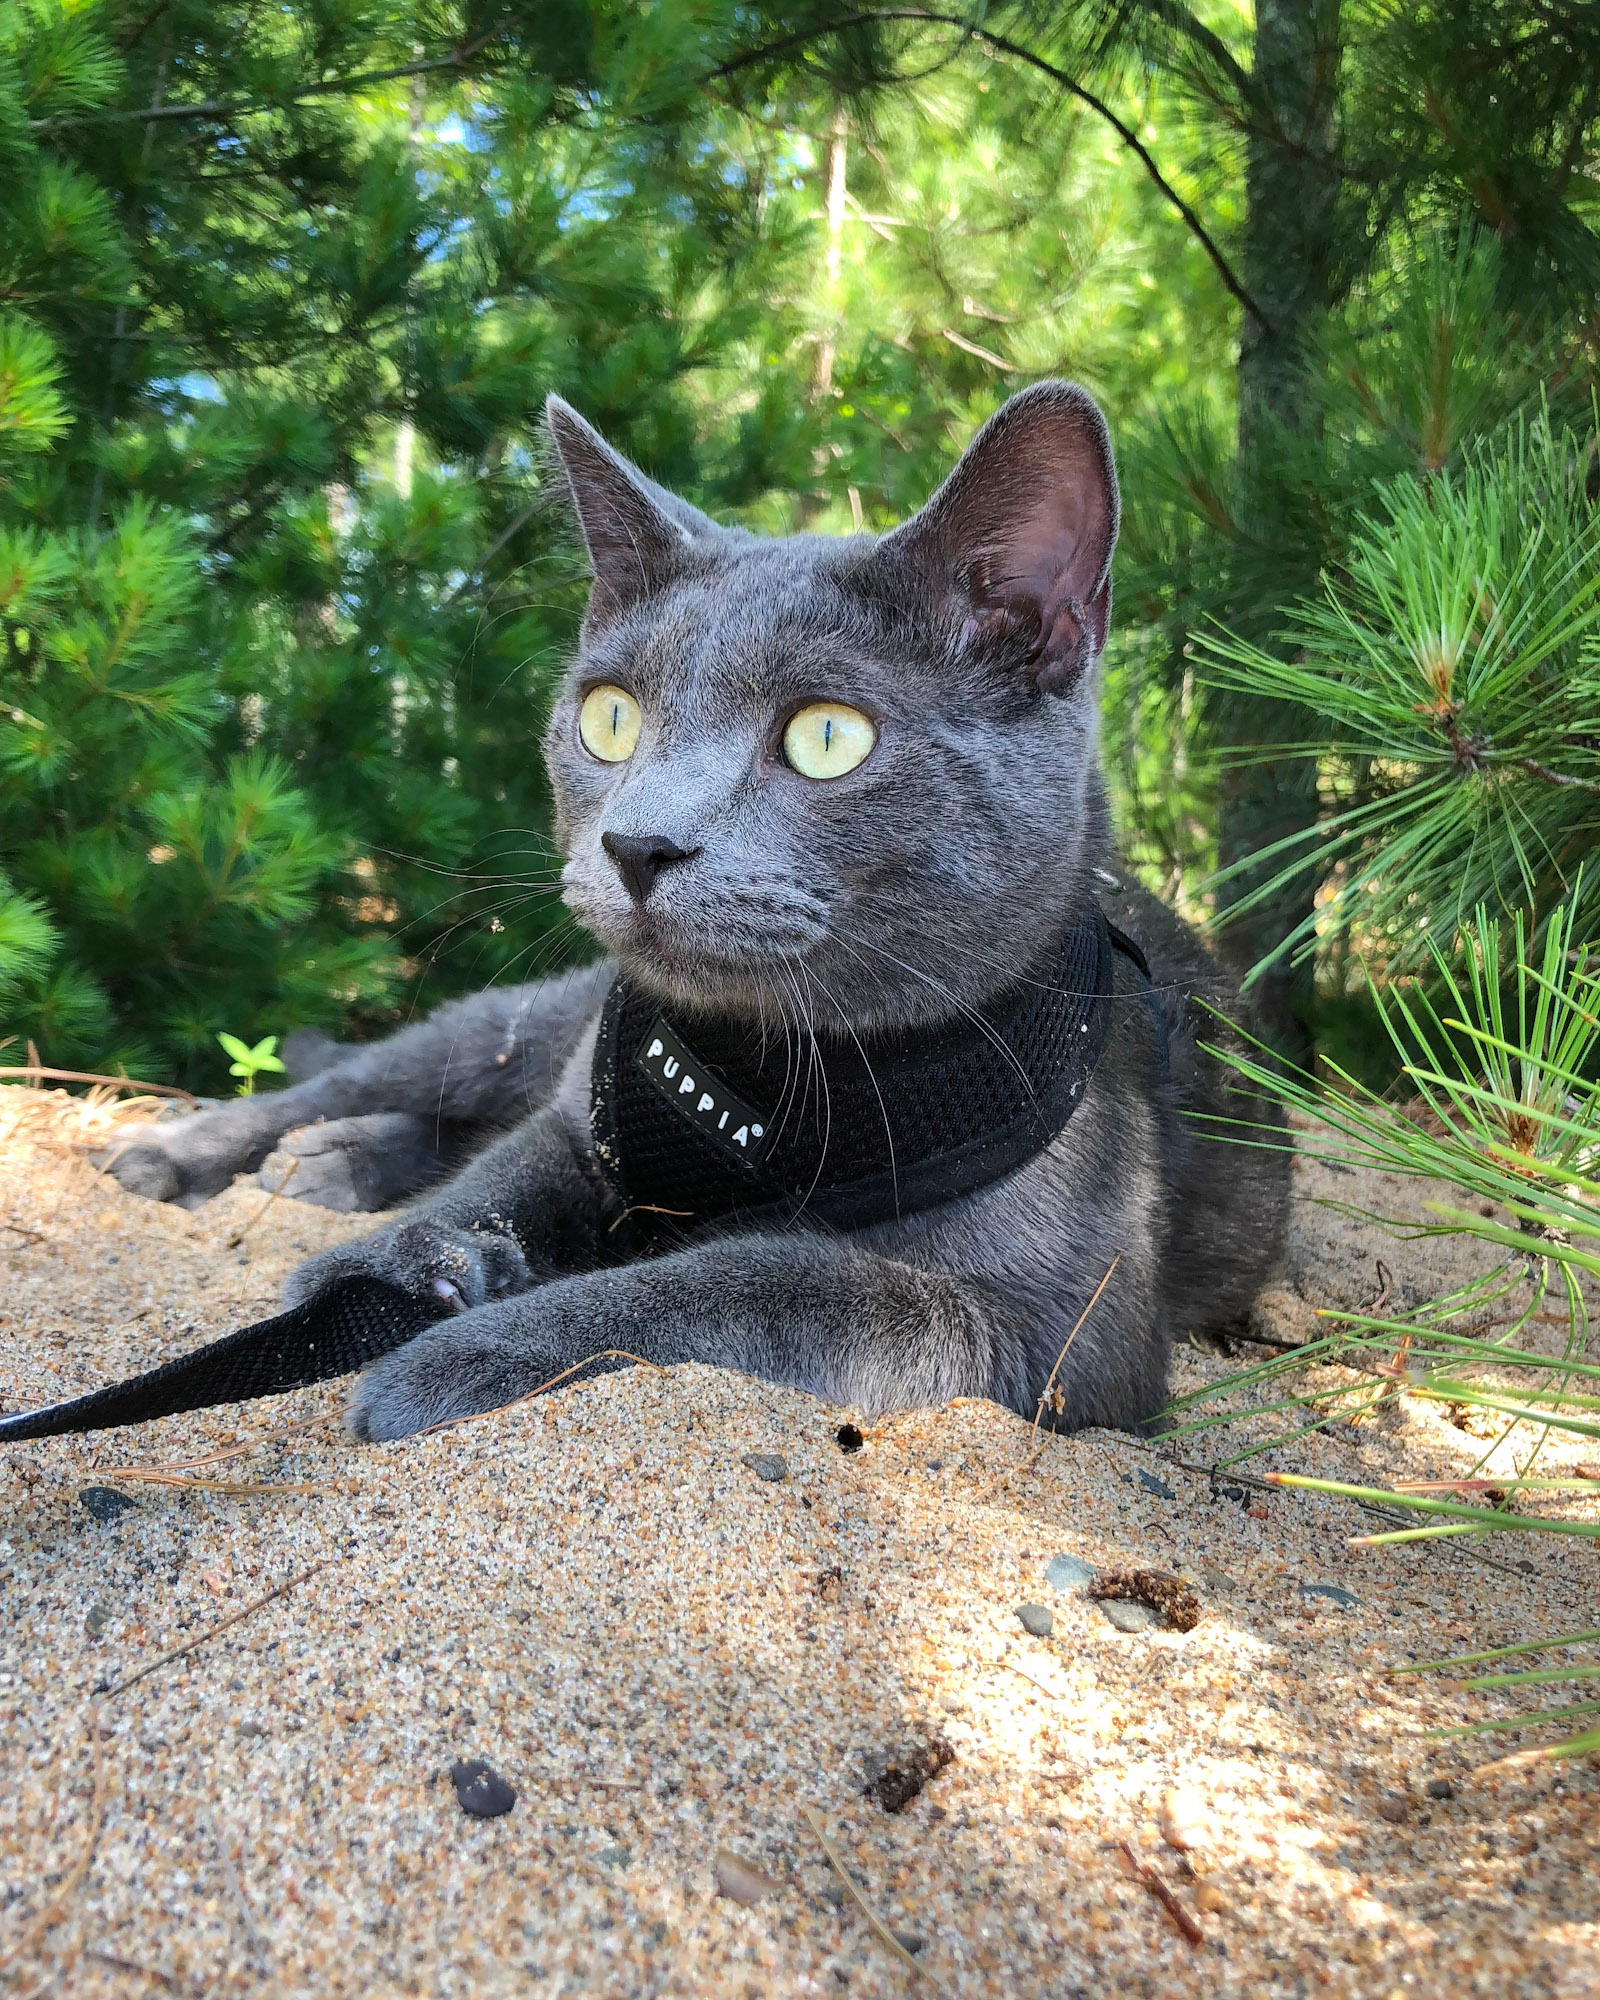 cat in harness rests among evergreen trees